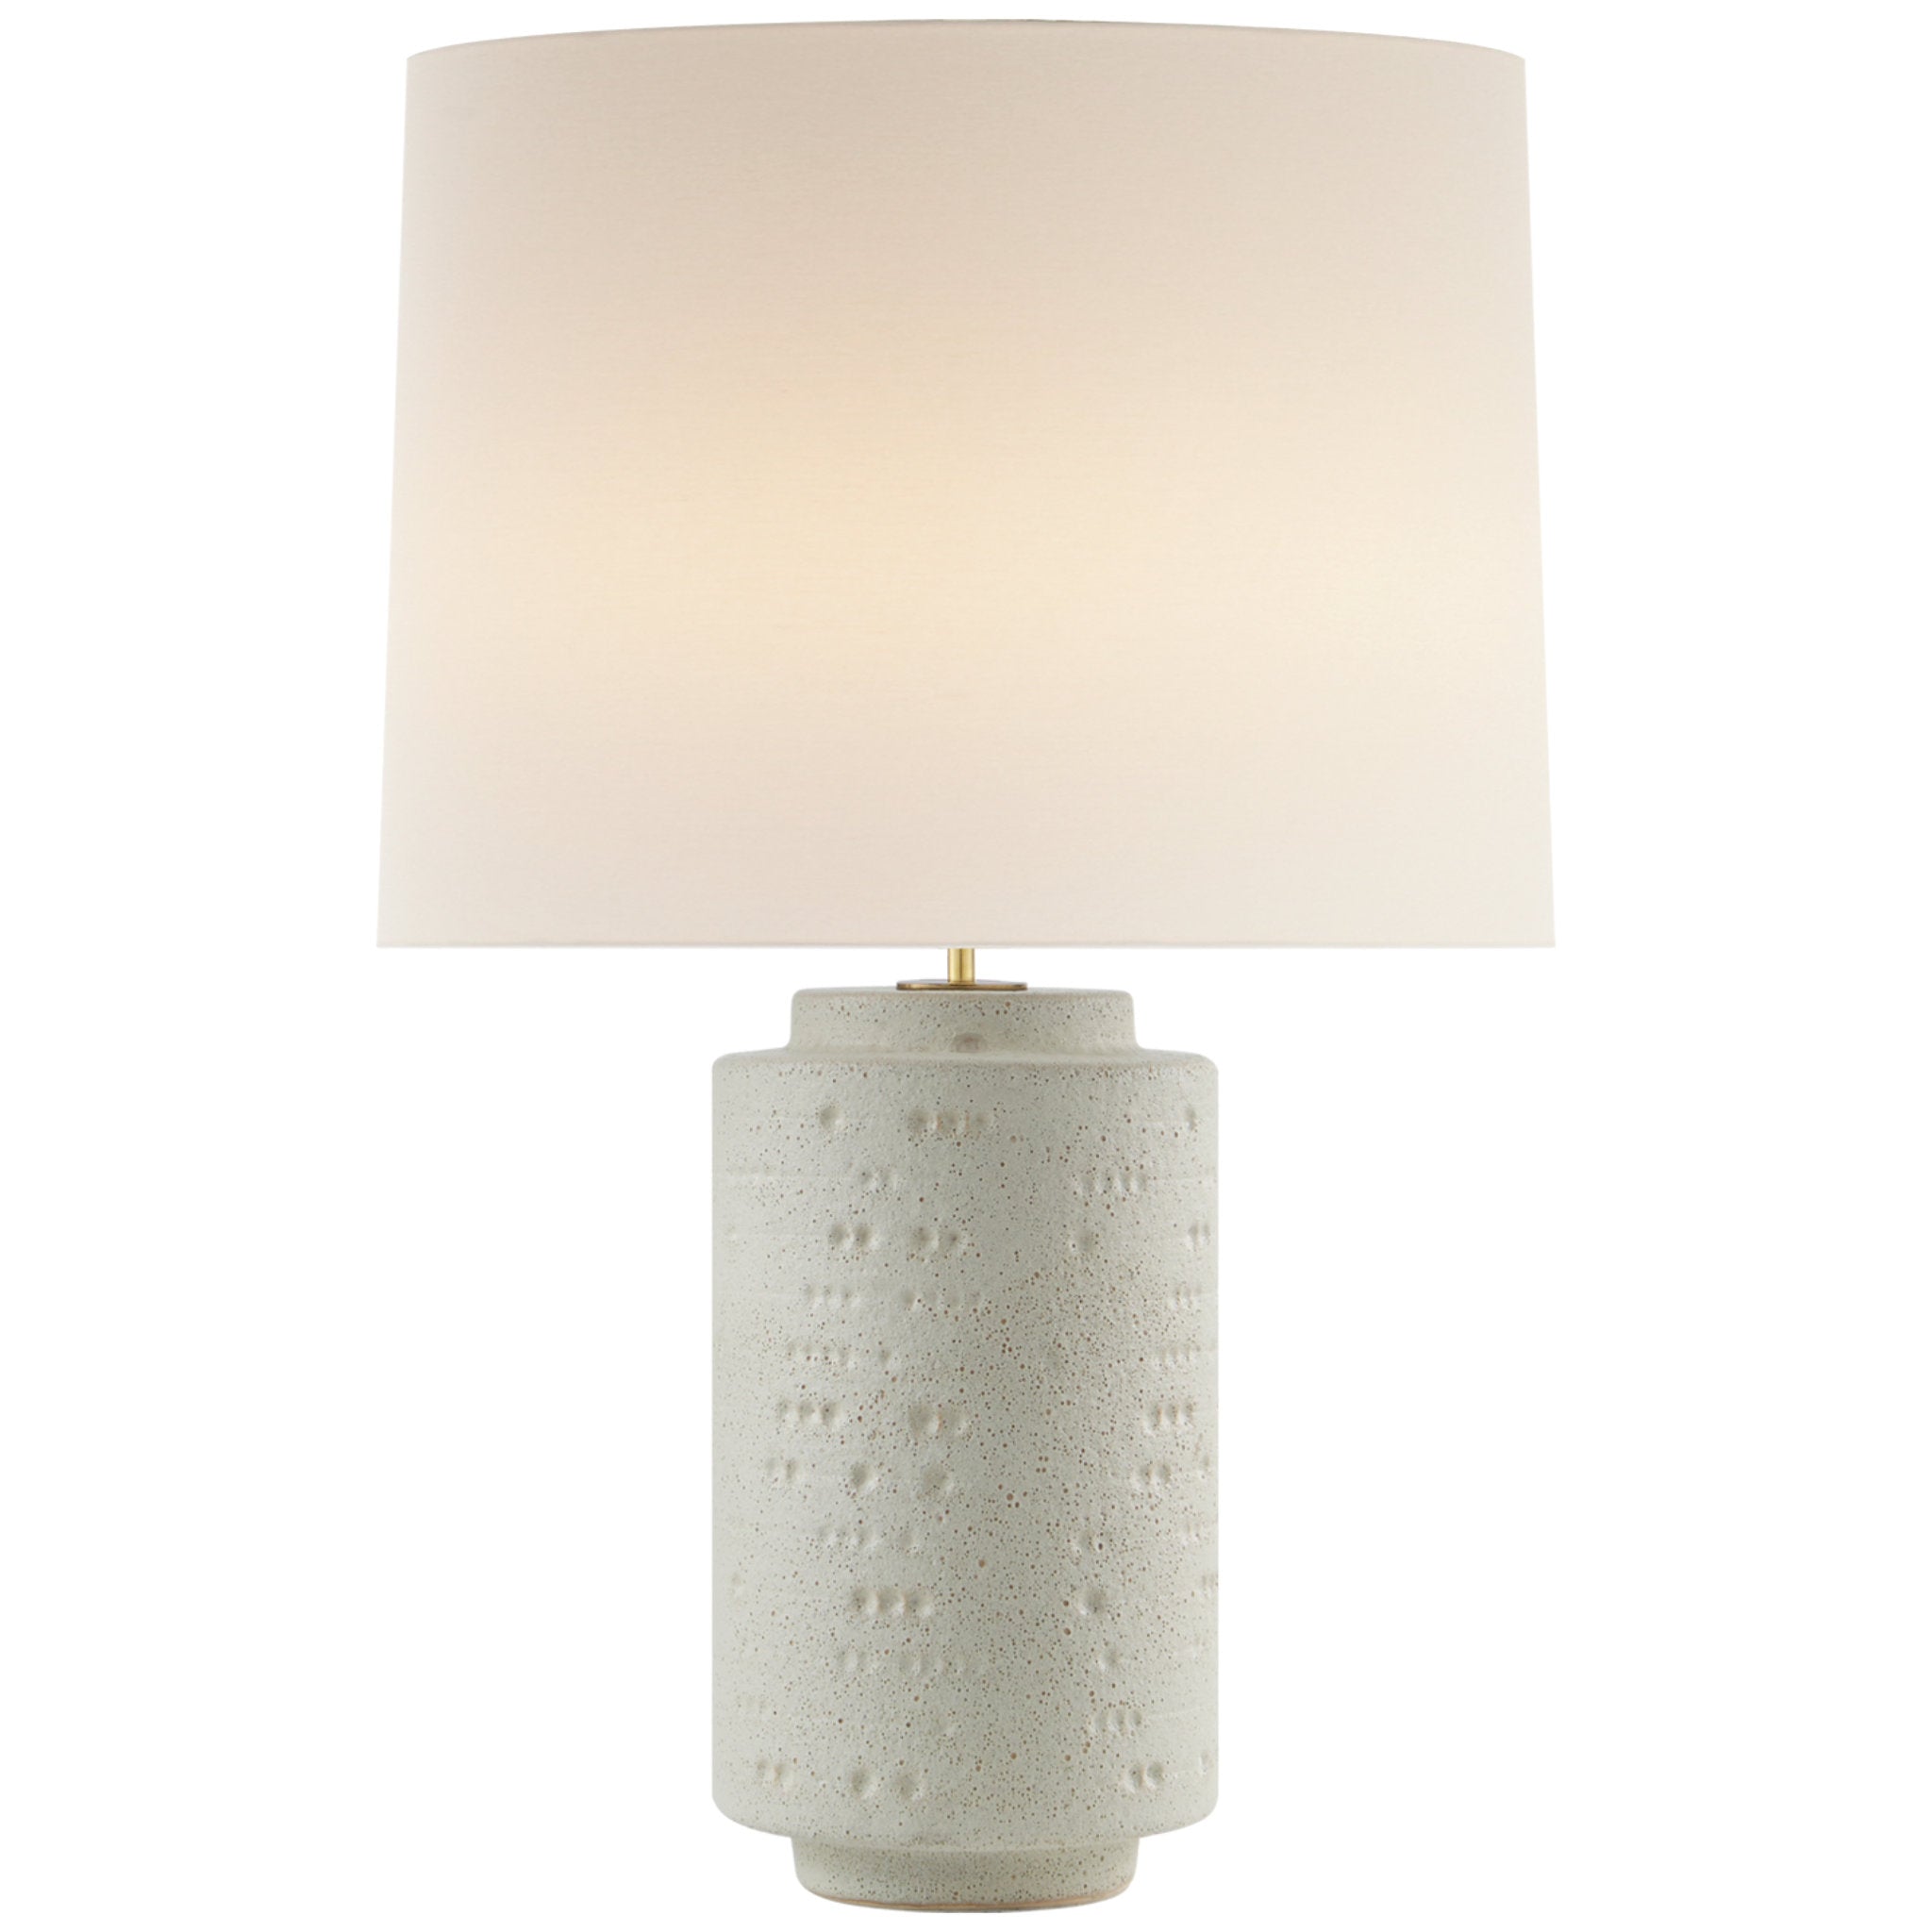 AERIN Darina Large Table Lamp in Volcanic Ivory with Linen Shade